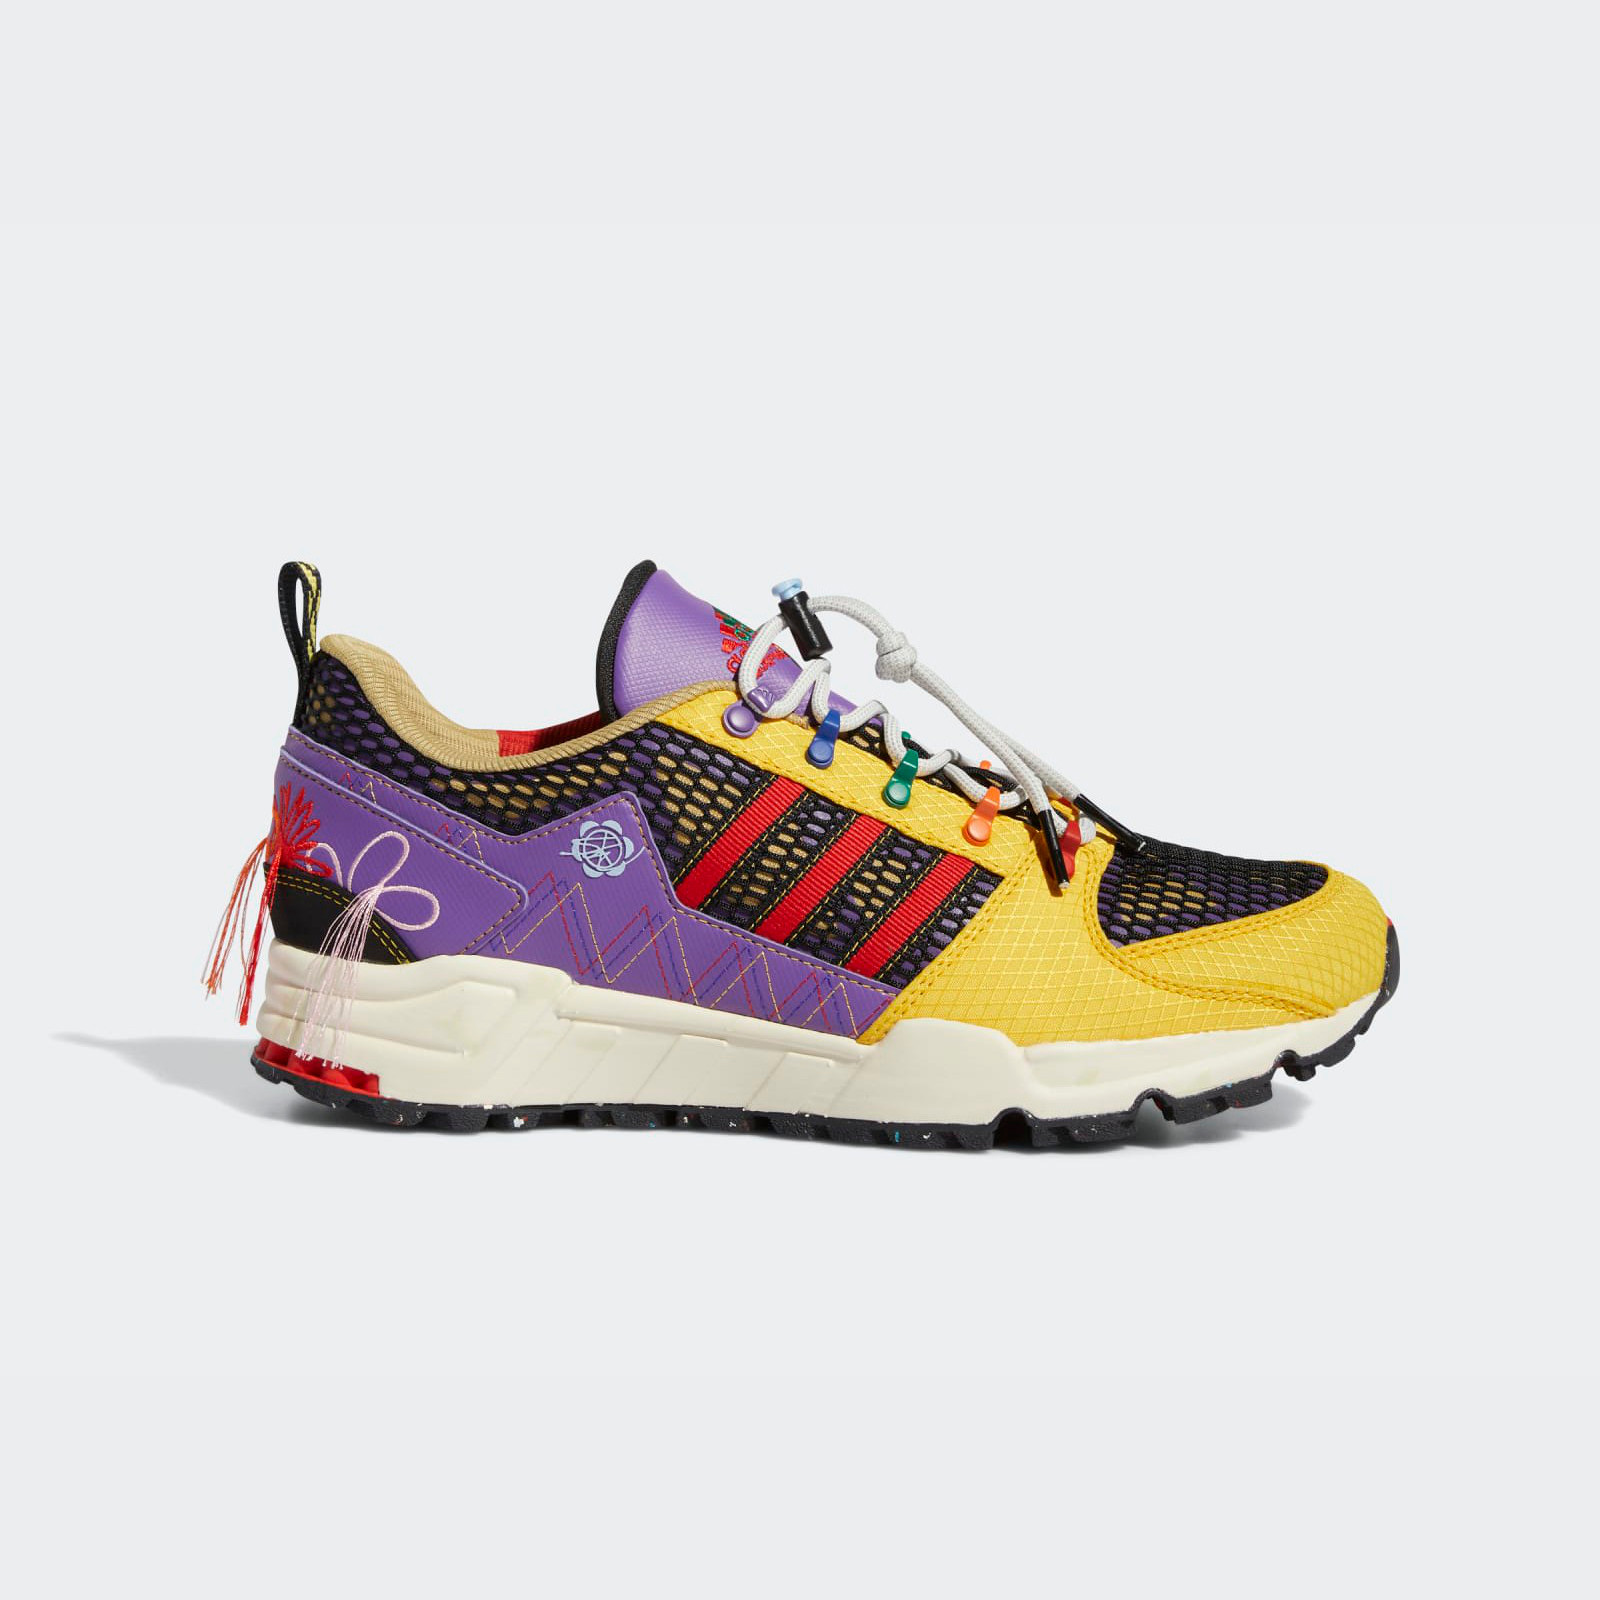 Sean Wotherspoon x Adidas
EQT Support 93
Gold / Red / Purple